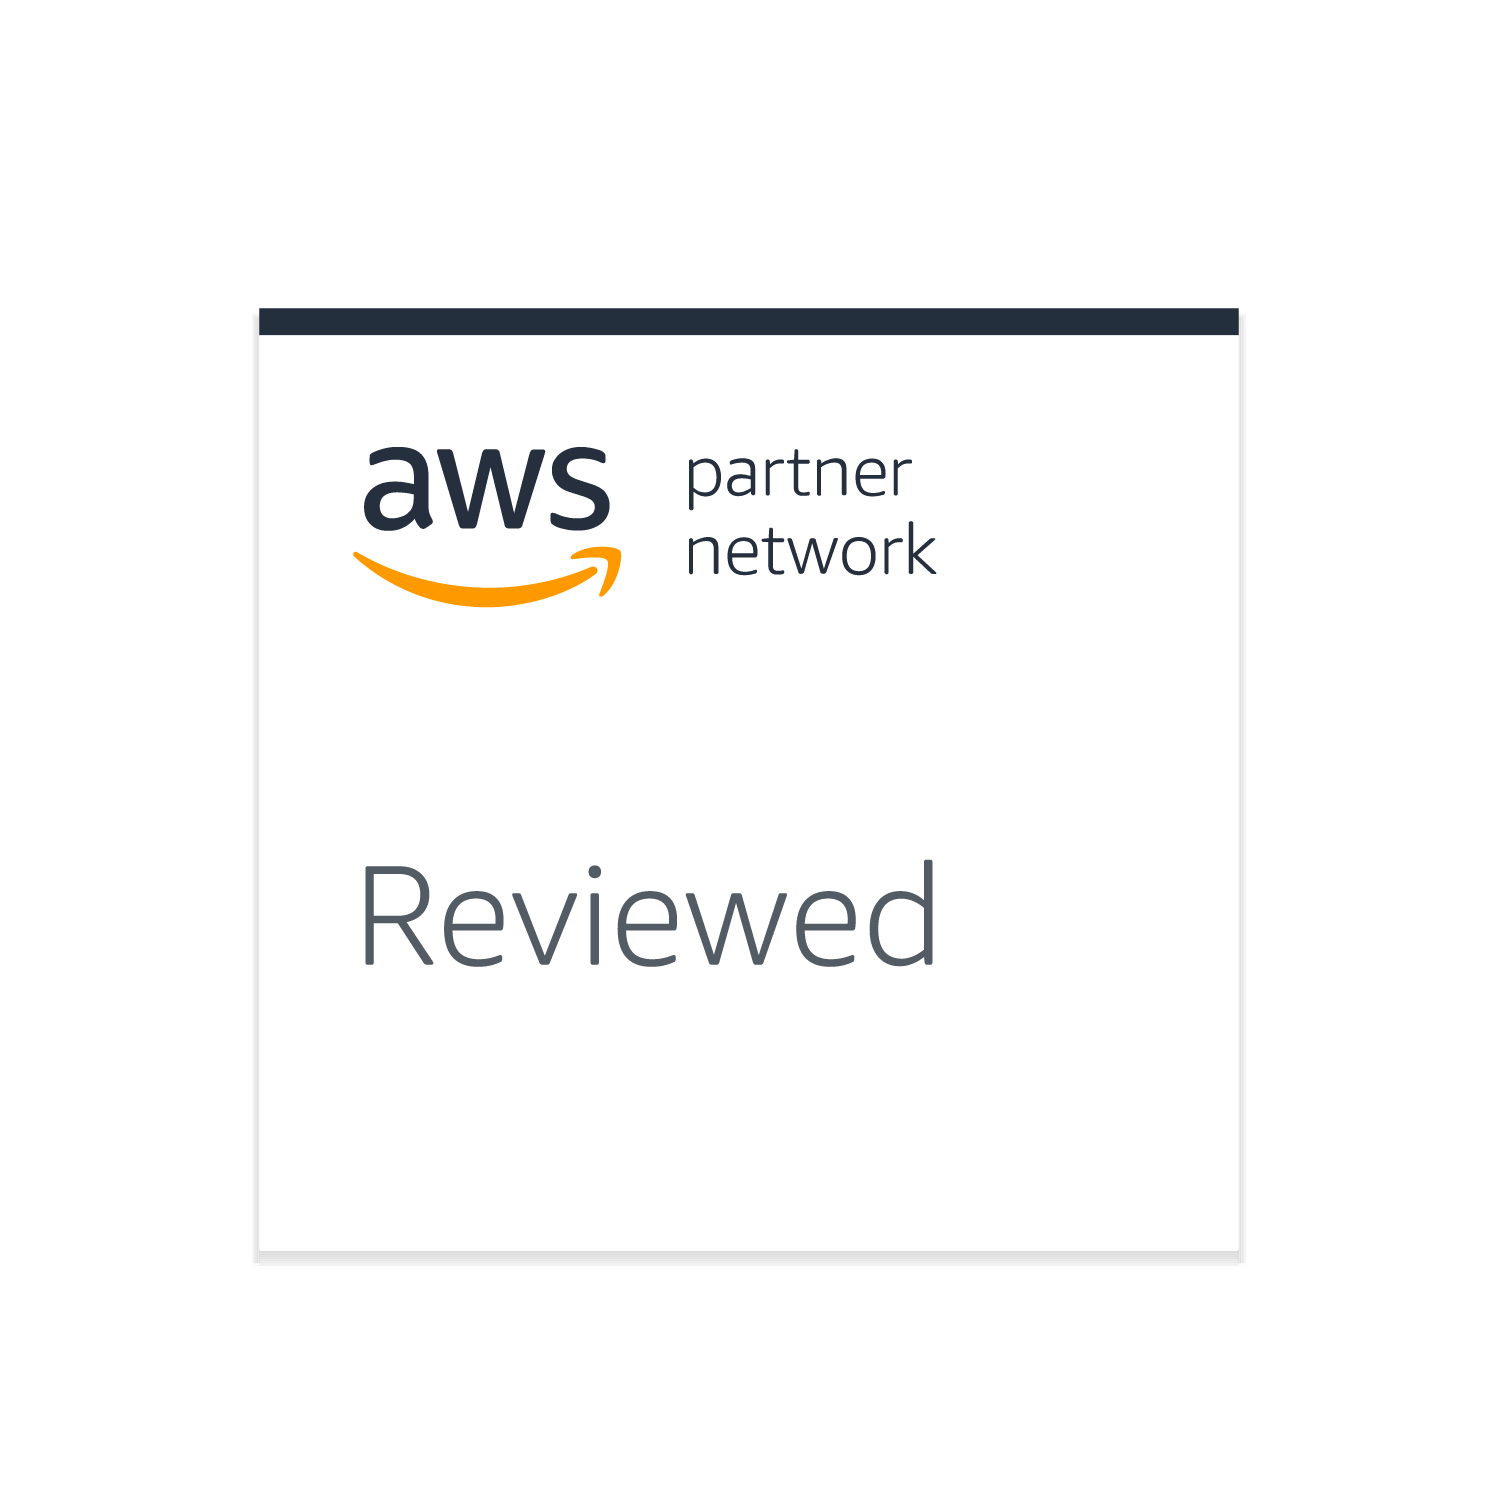 Reviewed by AWS Partner Network logo